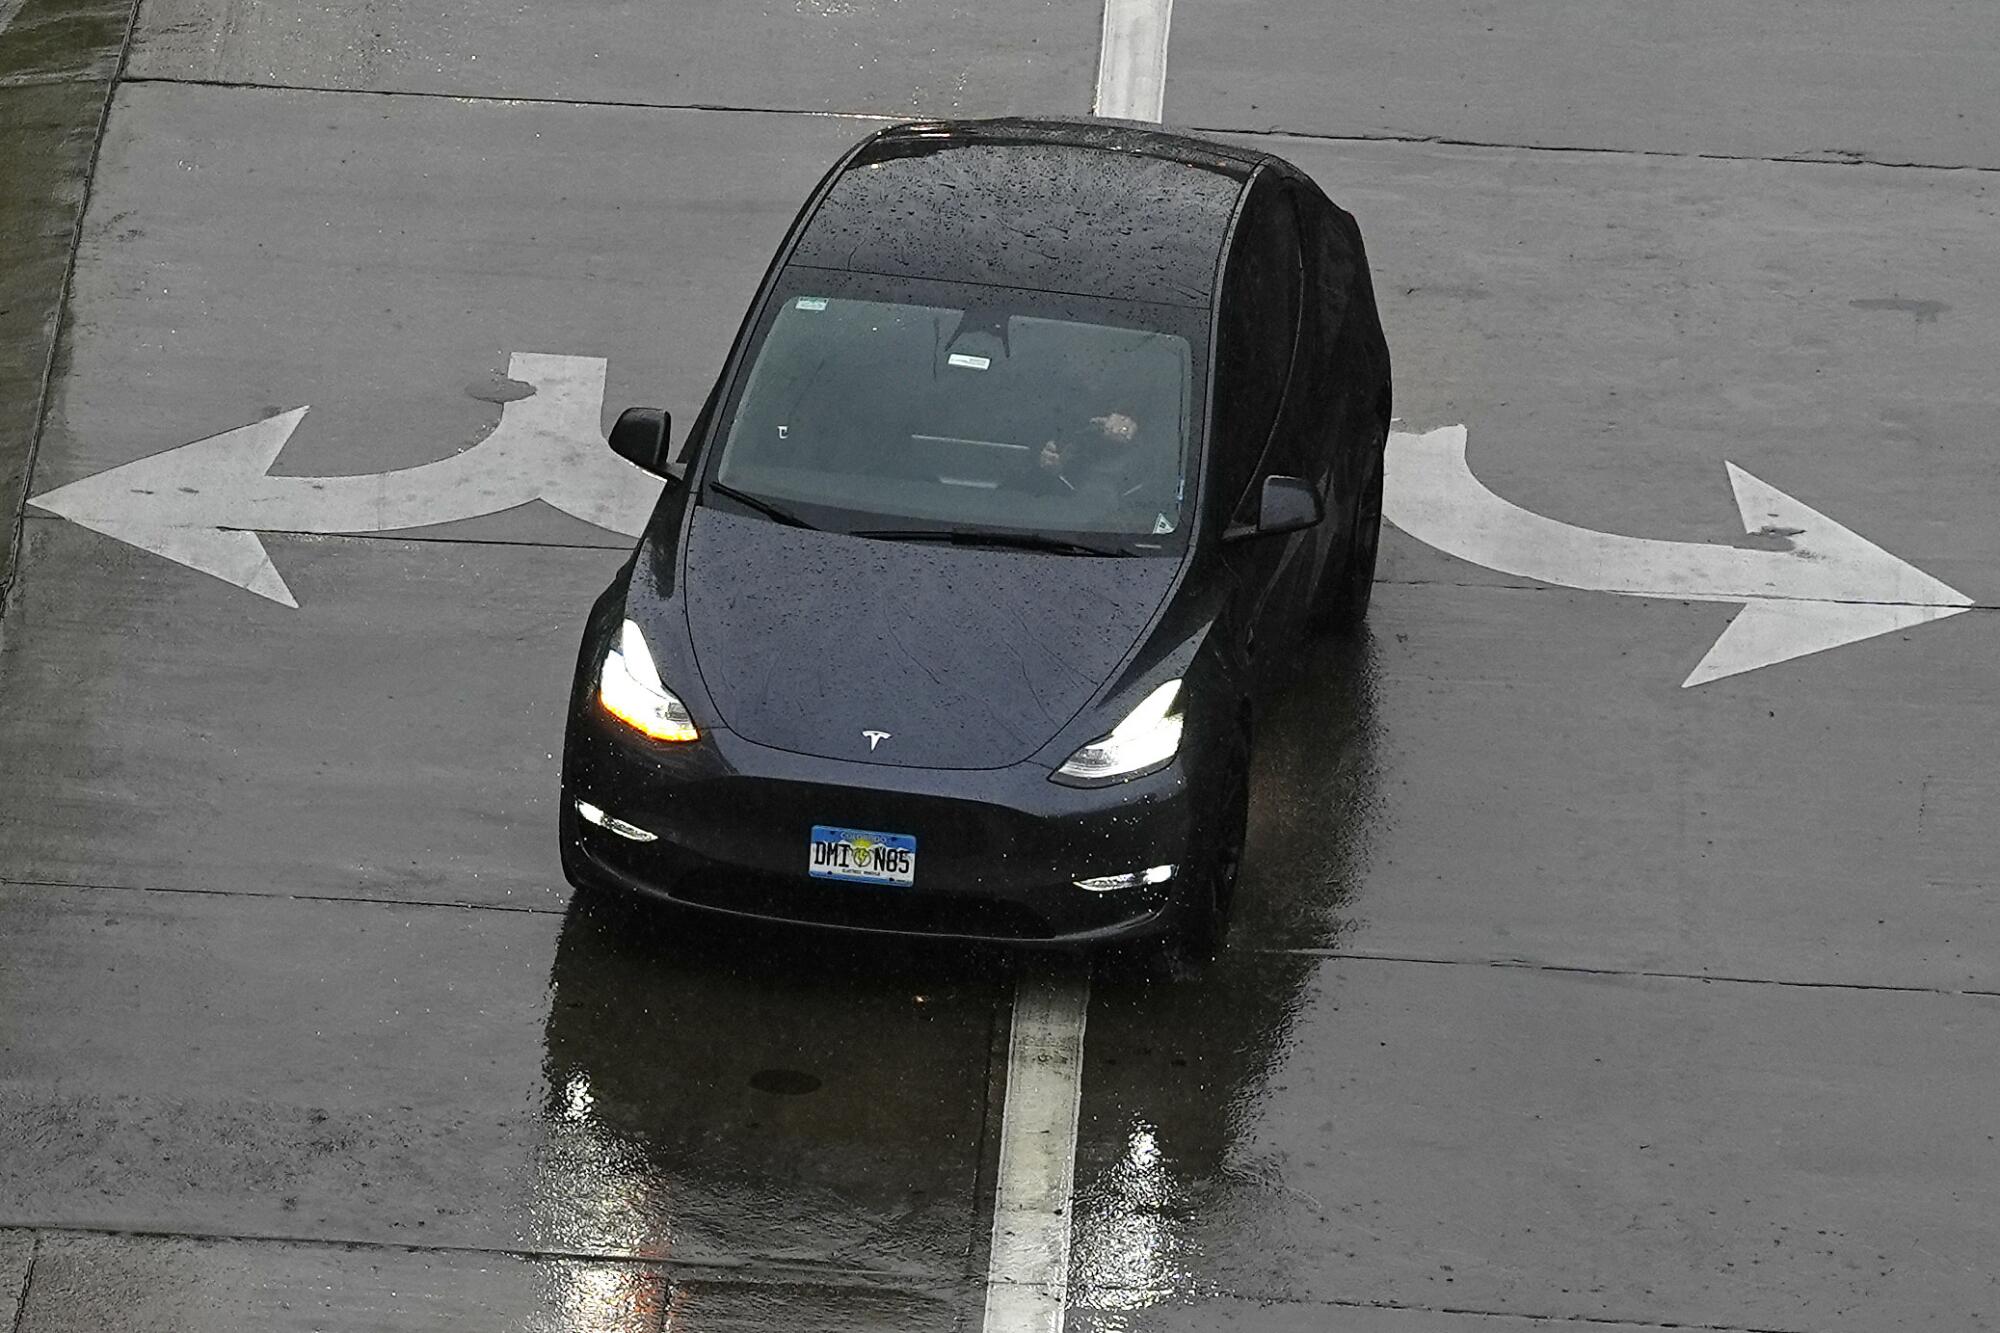 A black Tesla in the middle of a wet road with arrows pointing in opposite directions